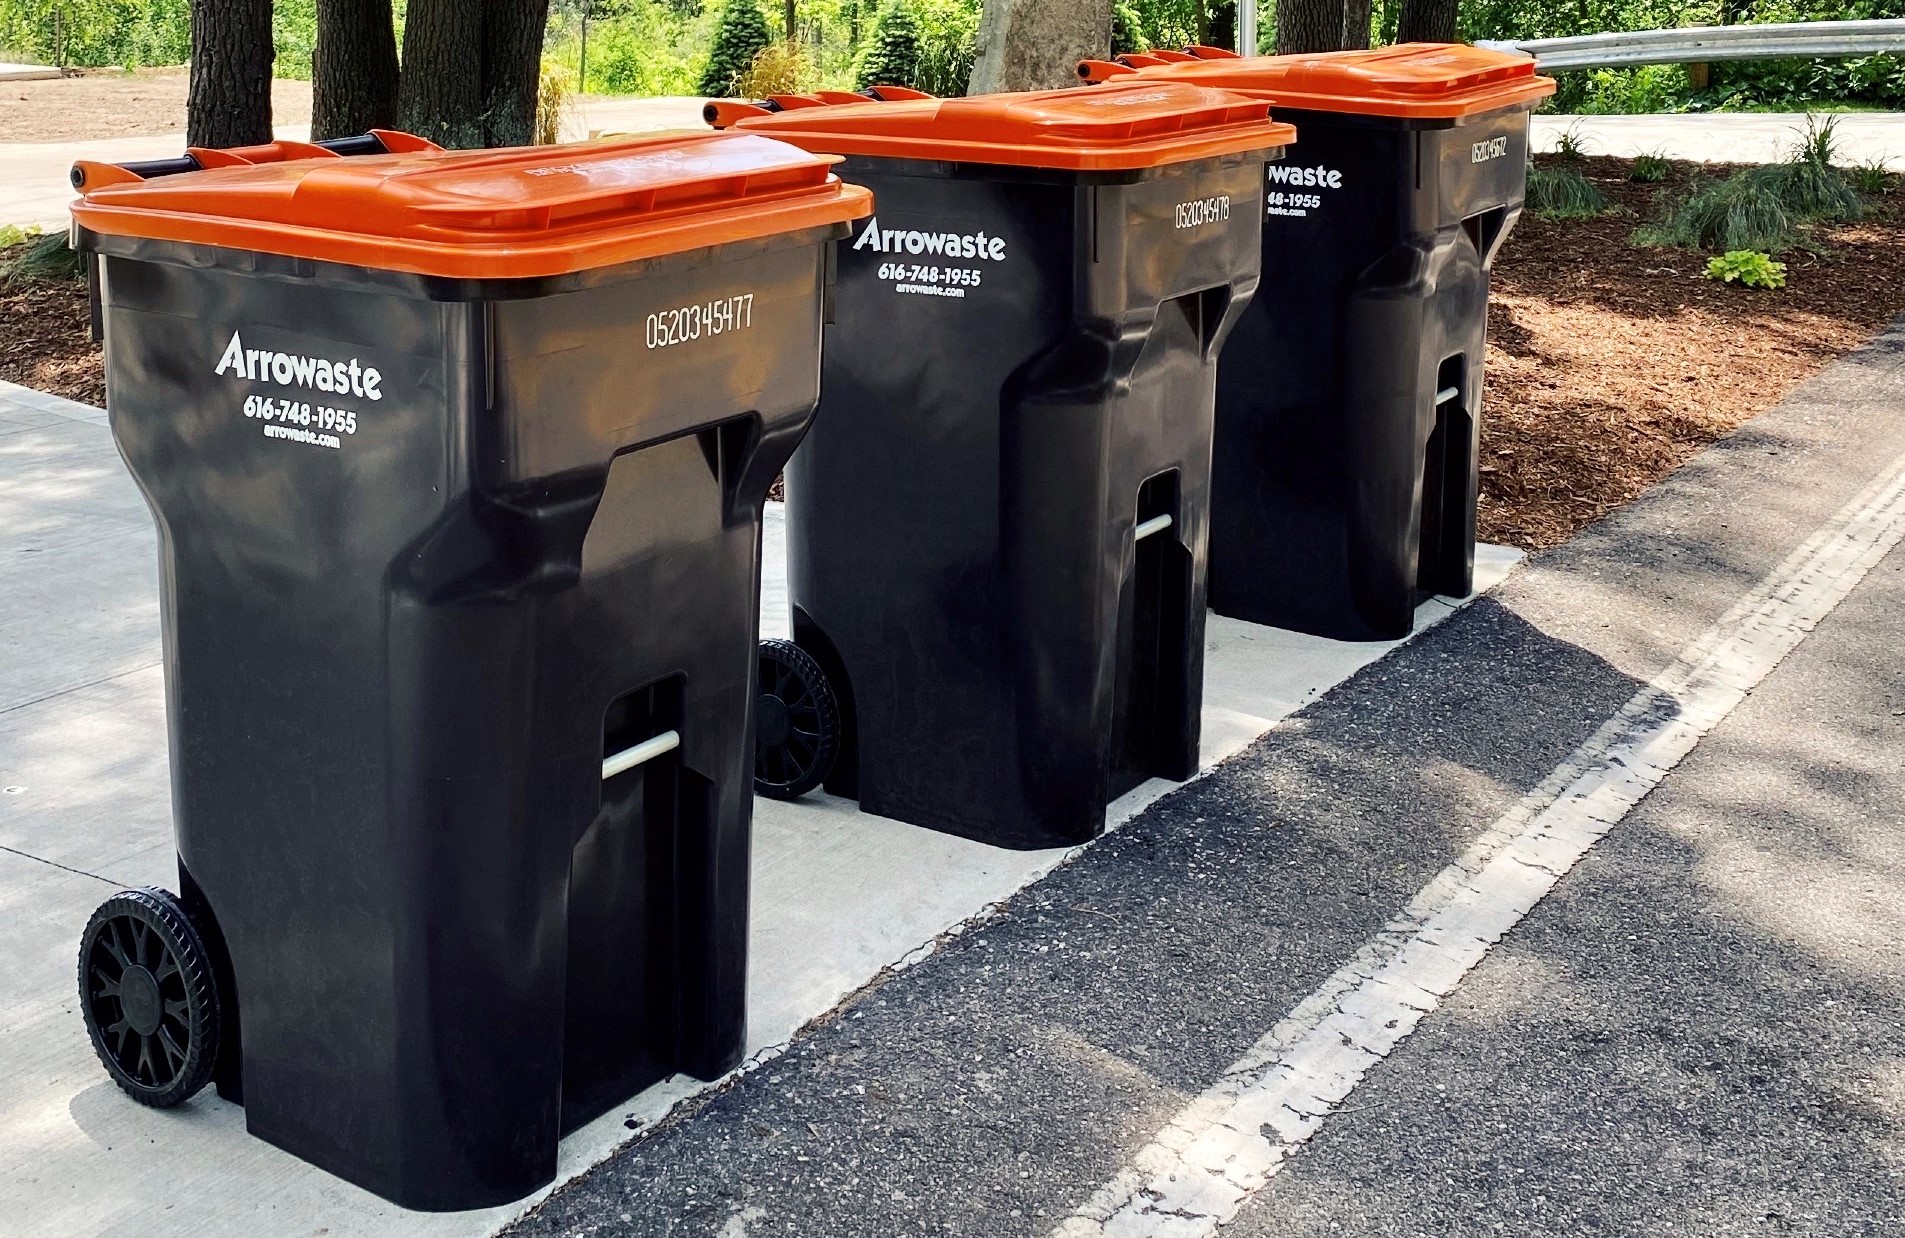 Santa Fe approves increase to residential trash and recycling services